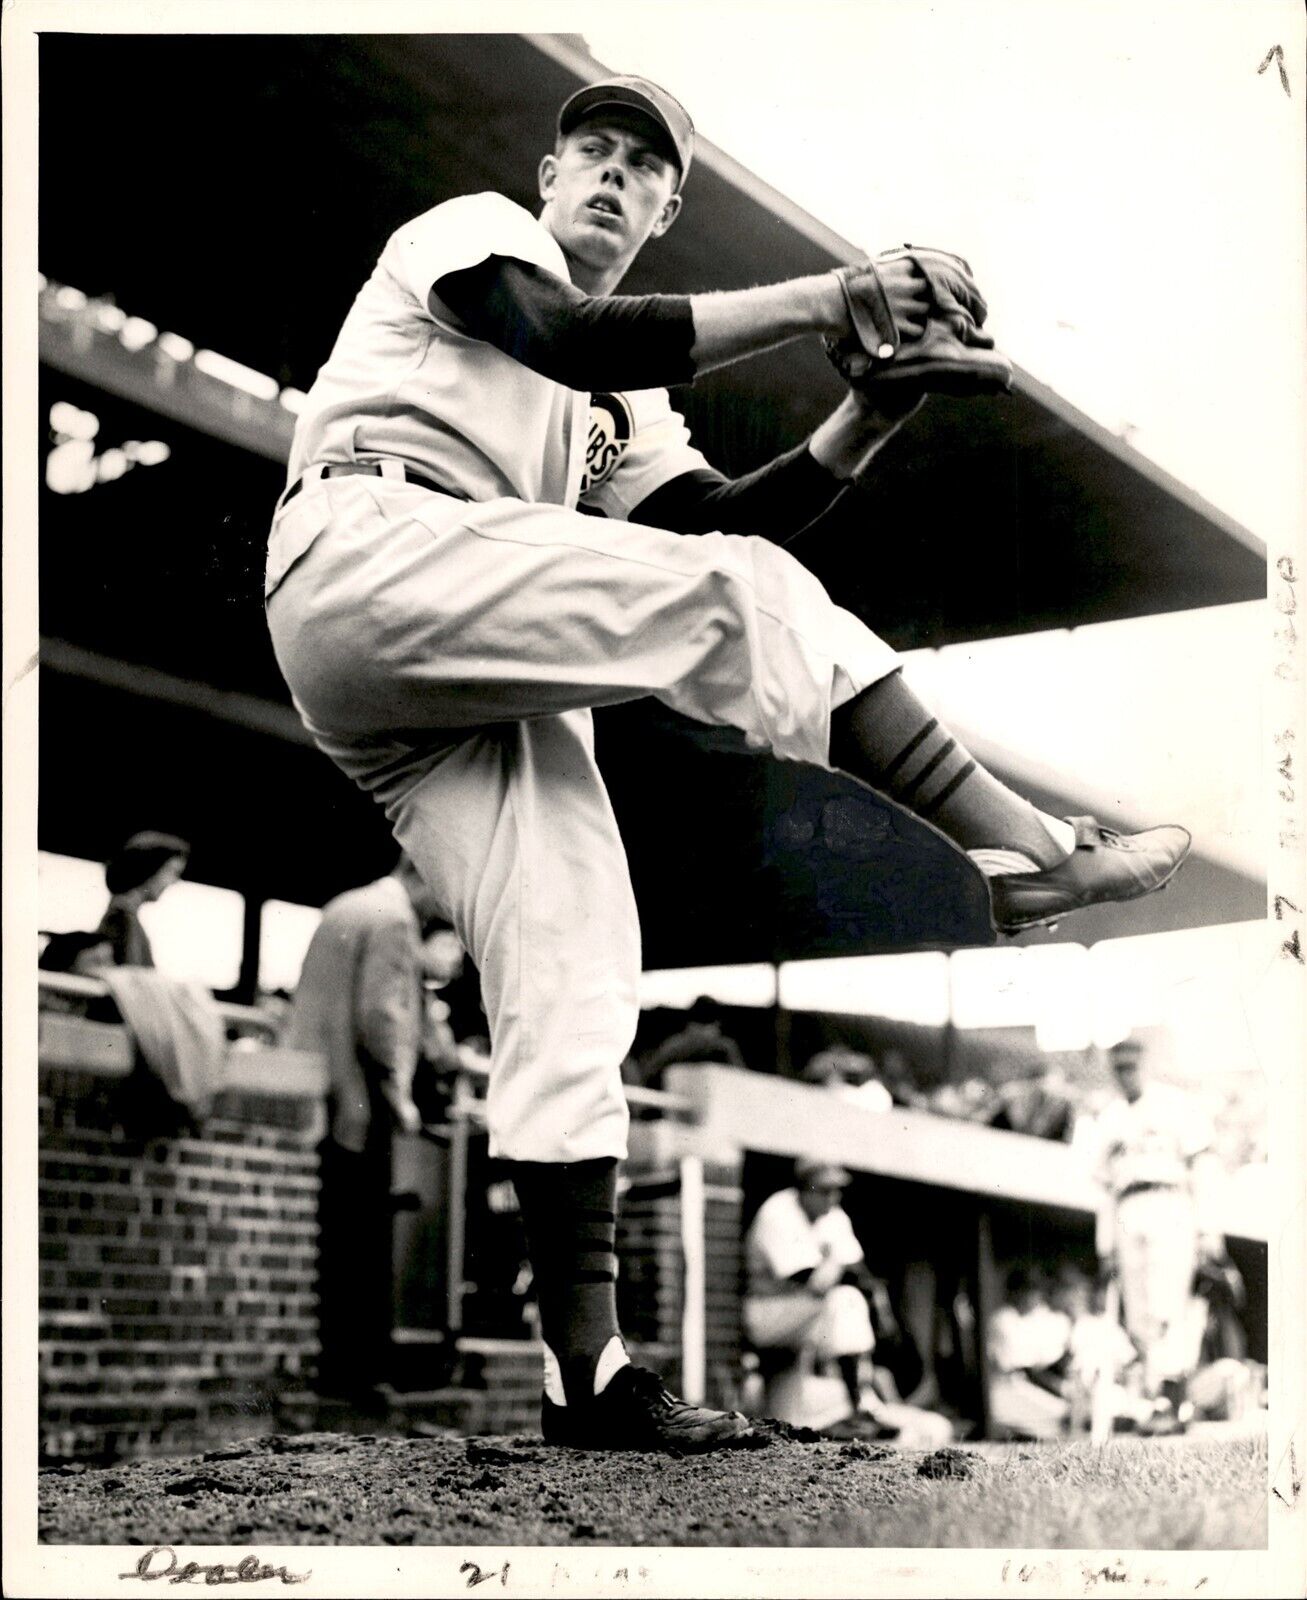 LG979 Original Photo CLIFF CHAMBERS MLB BASEBALL PITCHER FOR 1948 CHICAGO CUBS